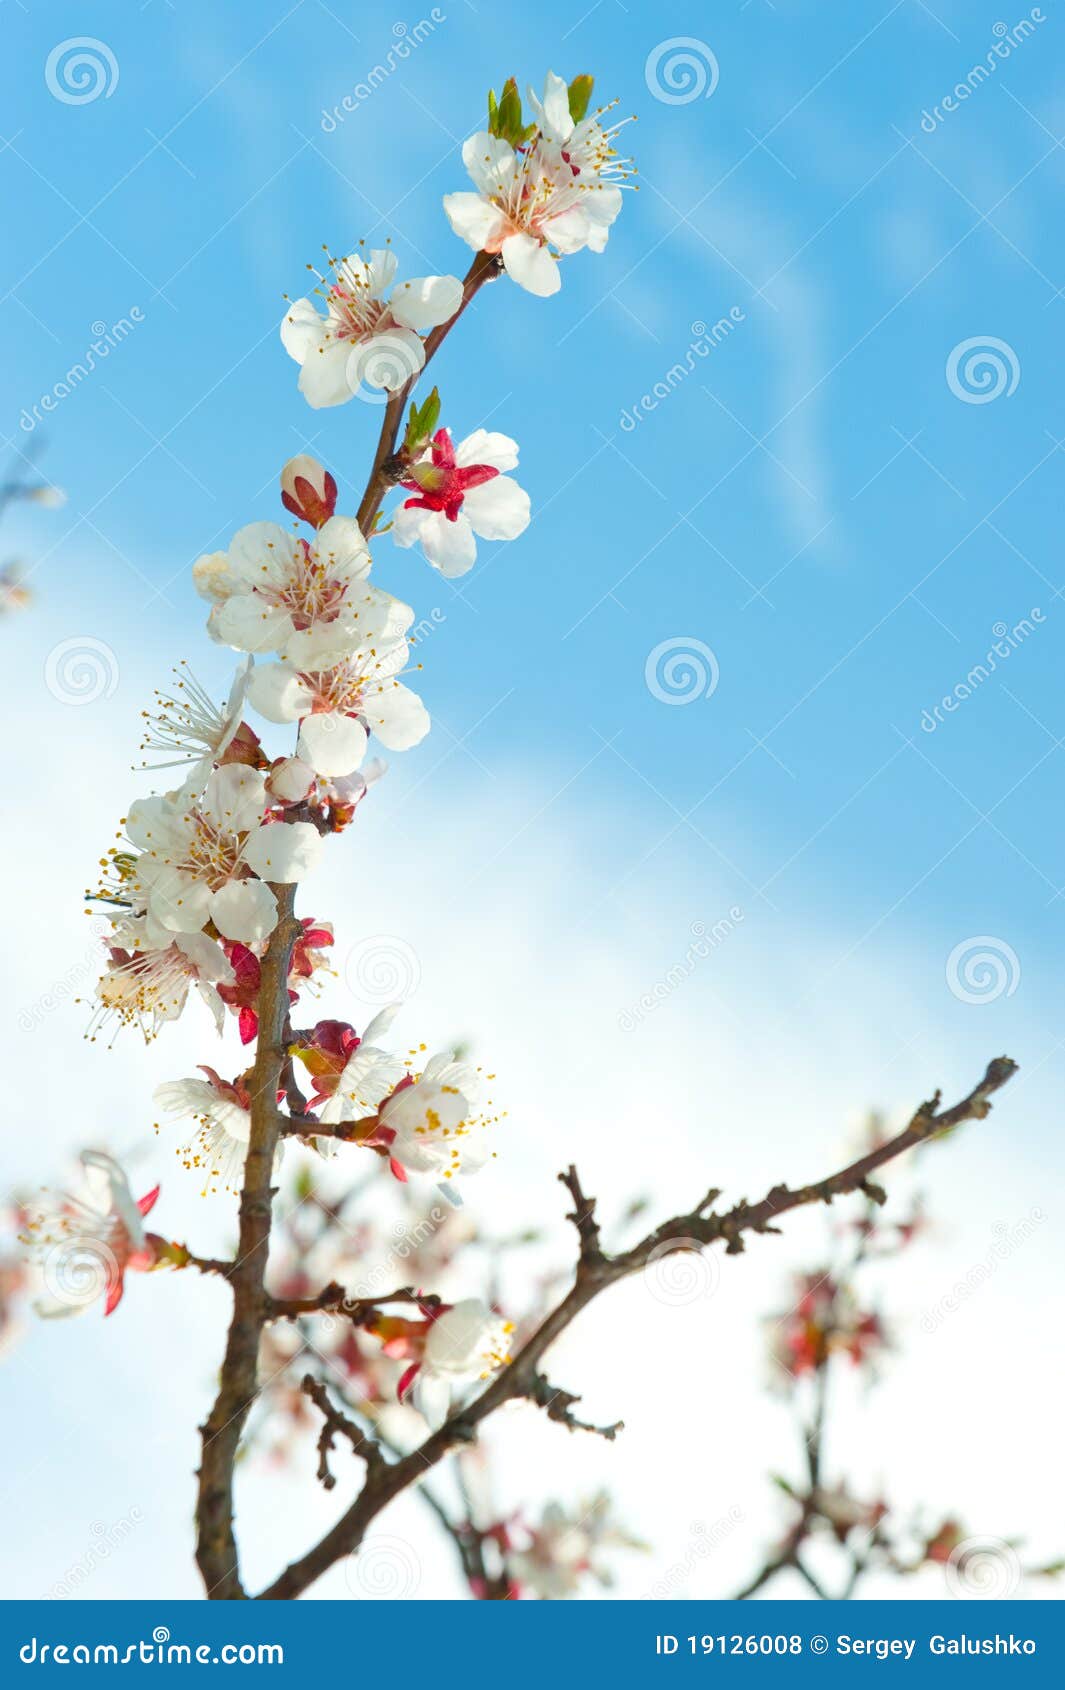 Blossoming Branches of a Tree Stock Photo - Image of decoration, march